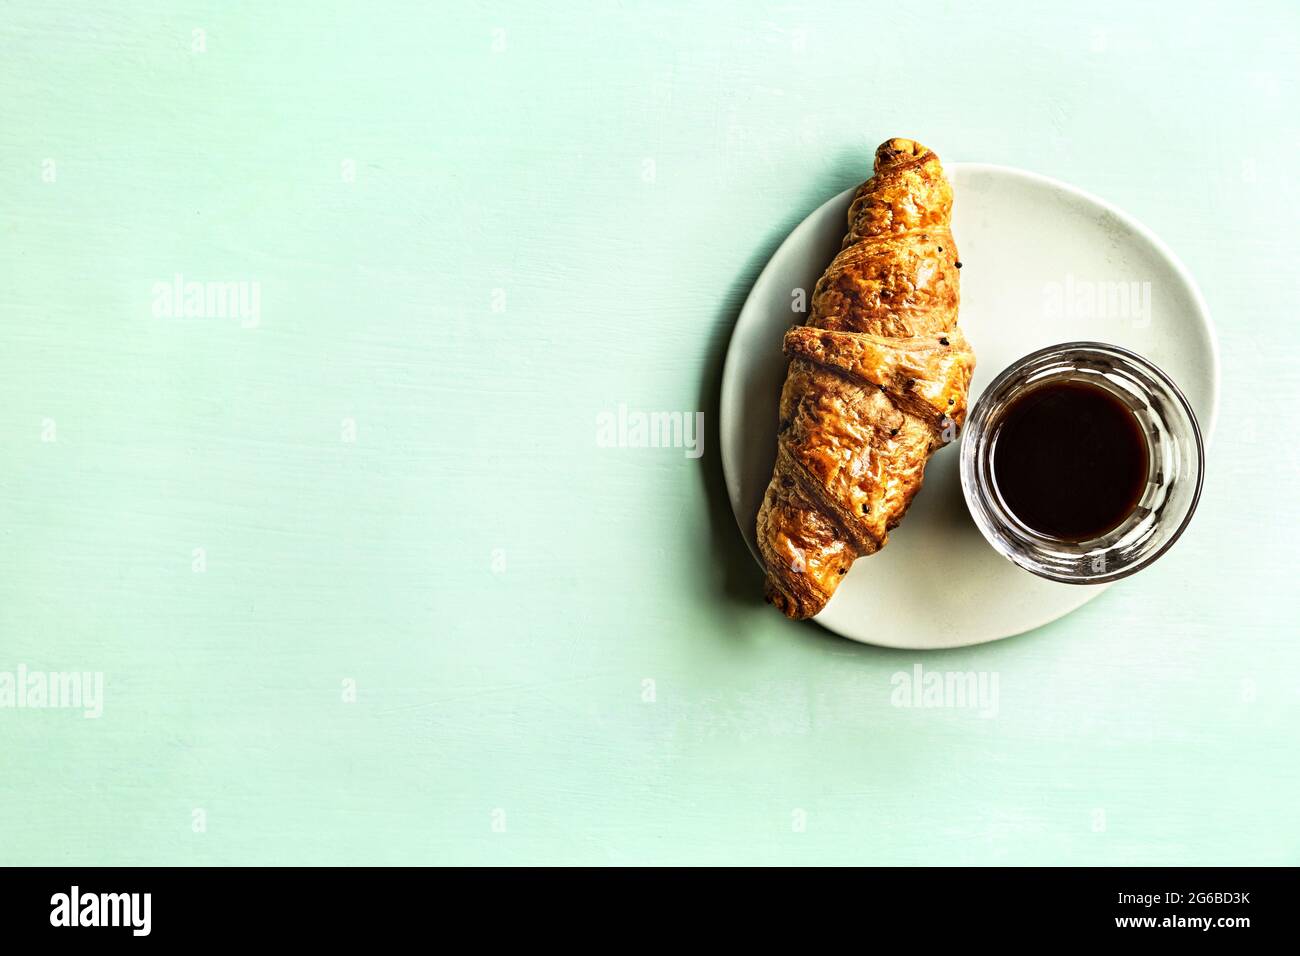 Buttery Croissant with a glass of Black Coffee Stock Photo